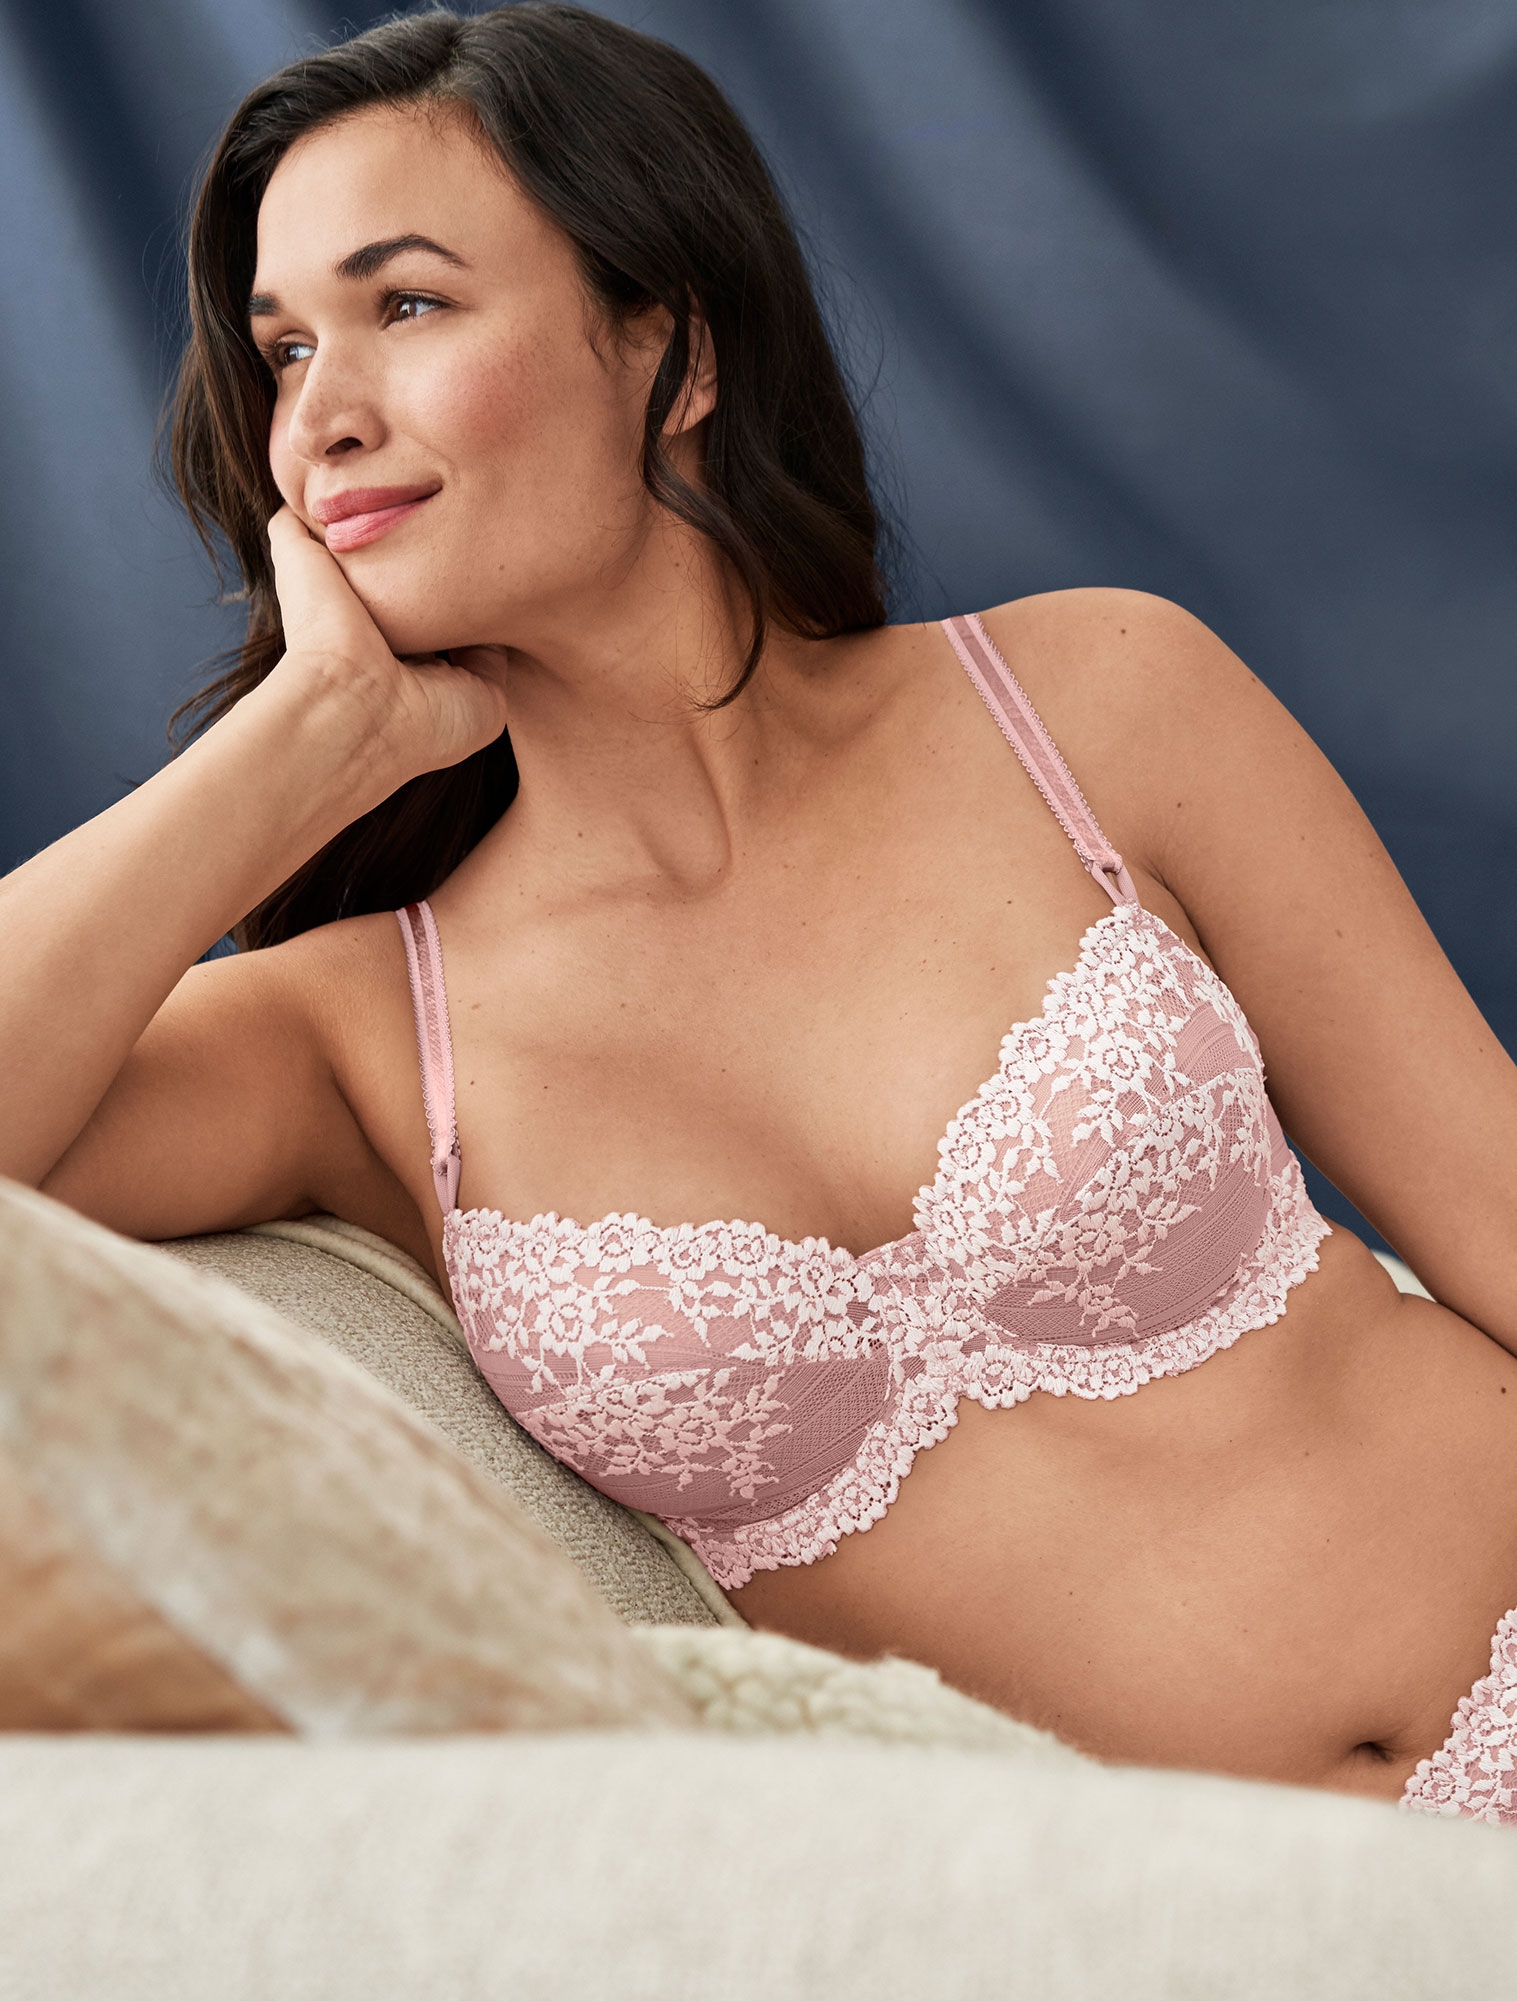 Wacoal Embrace Lace Underwire Bra 65191, Up To Ddd Cup In